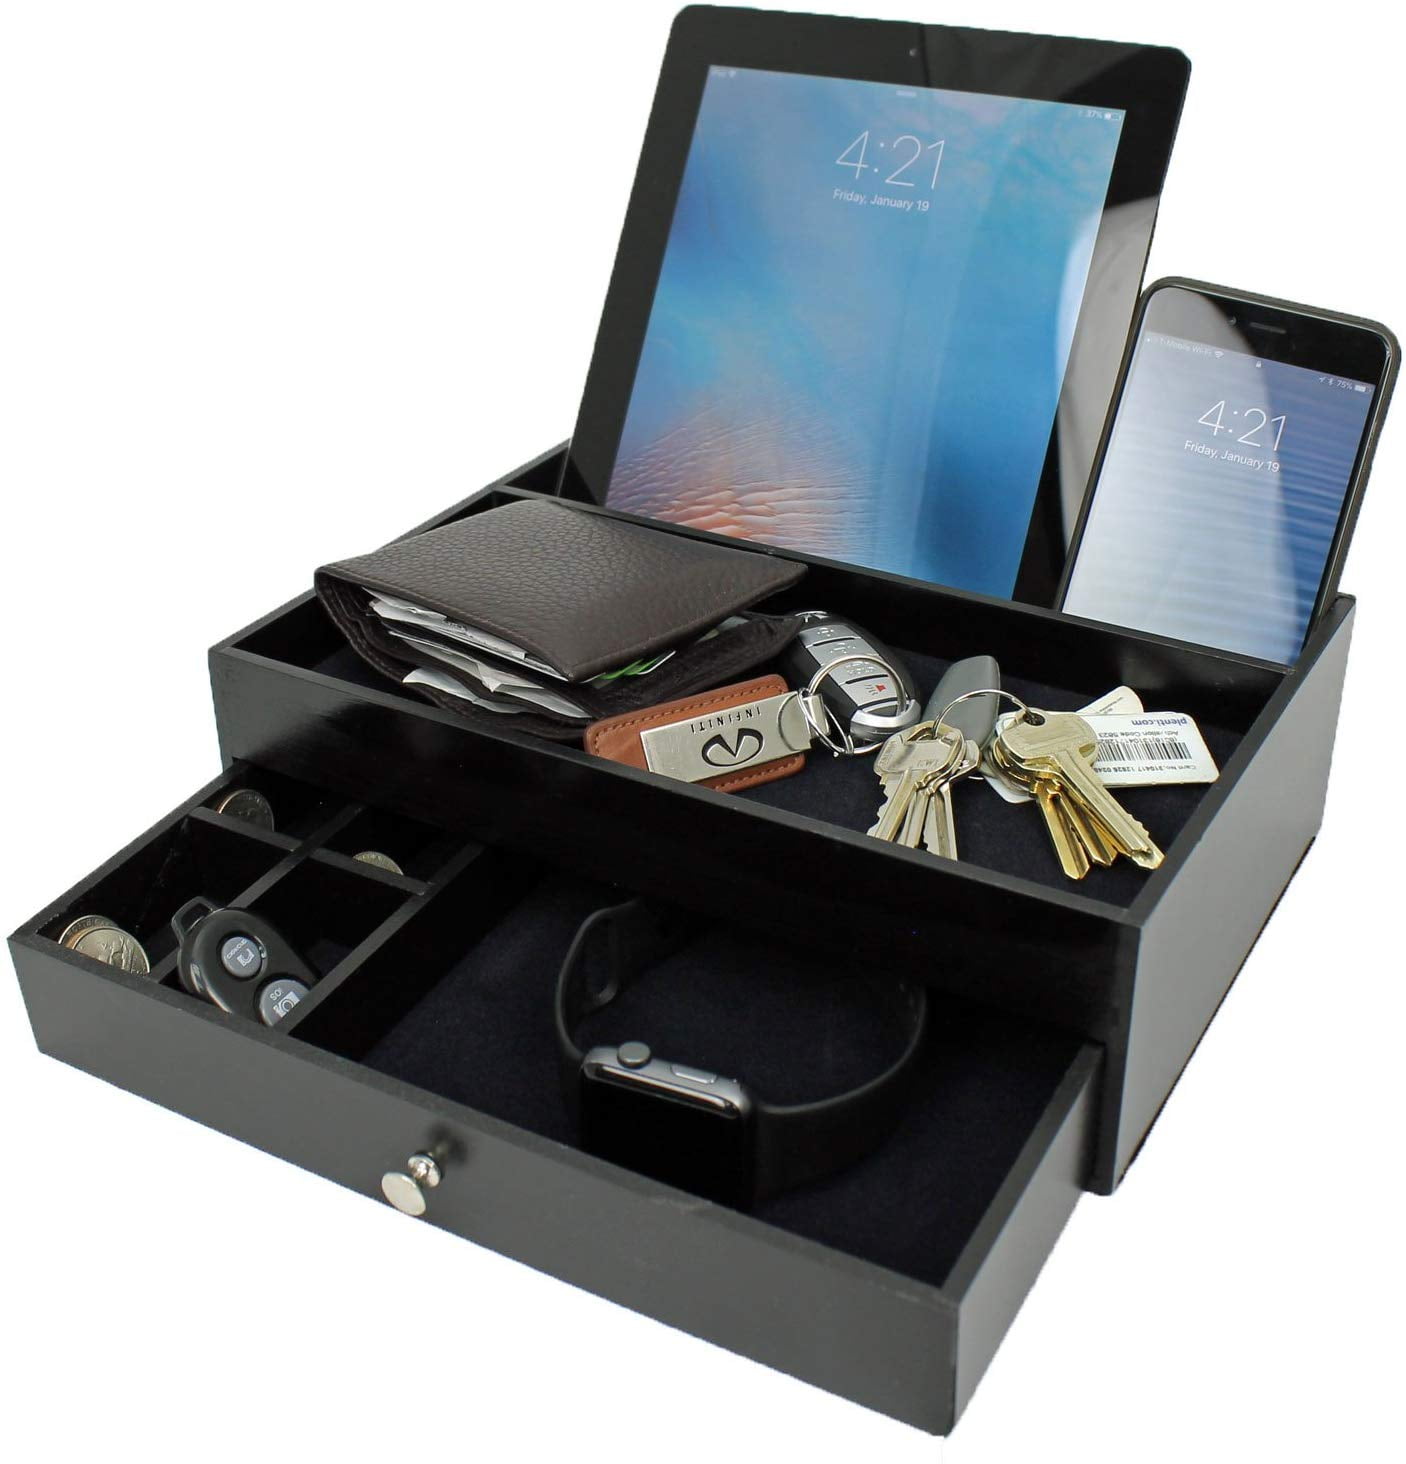 Desk Storage Tray 20.5x20.5CM,Suitable for Storing Remote Controls,Keys,Phones,Wallets,Coins,Jewelry